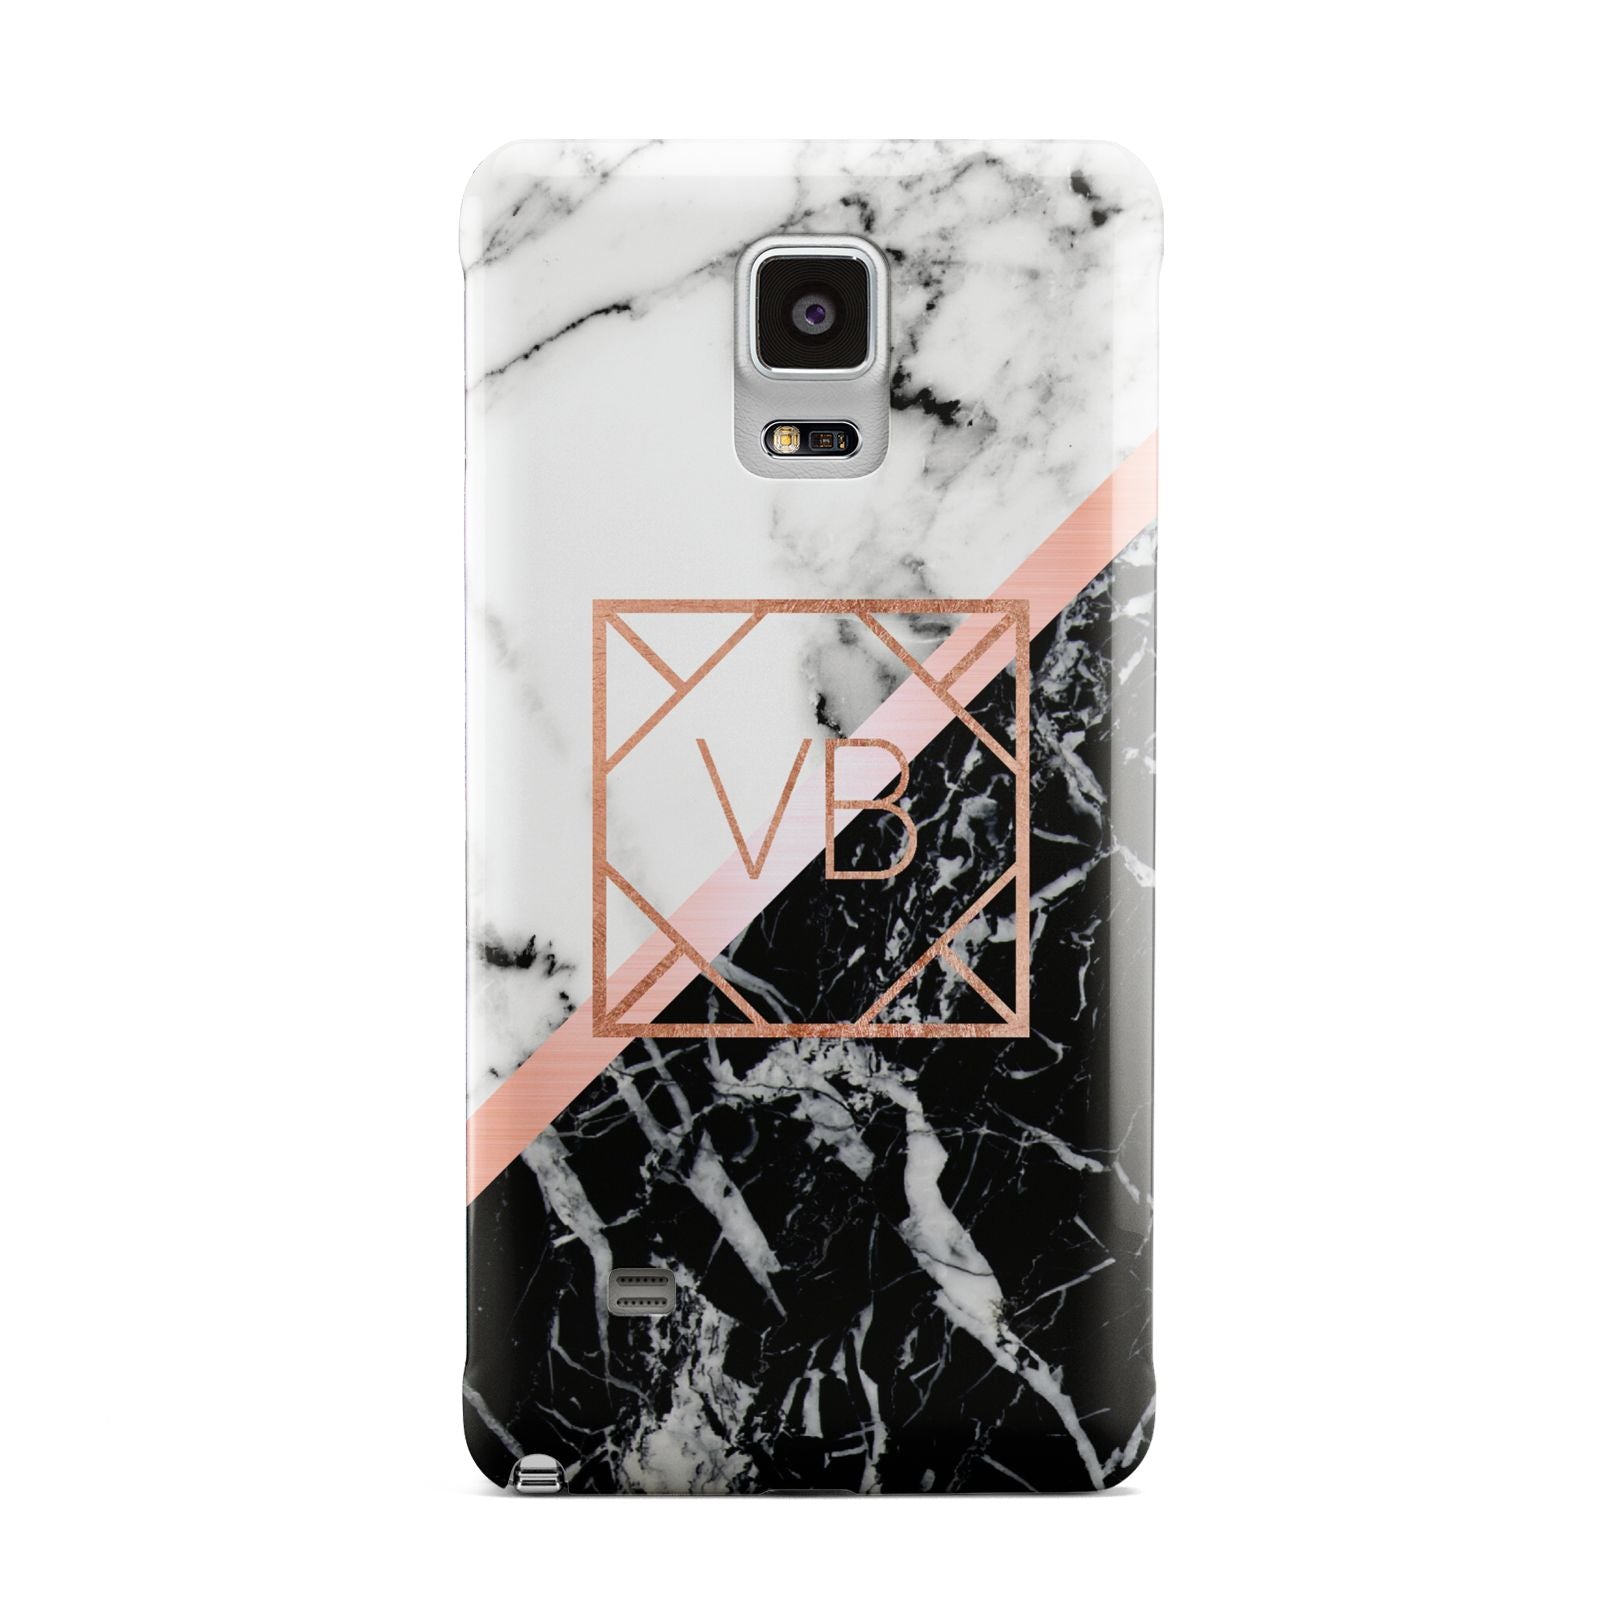 Personalised Rose Gold With Marble Initials Samsung Galaxy Note 4 Case